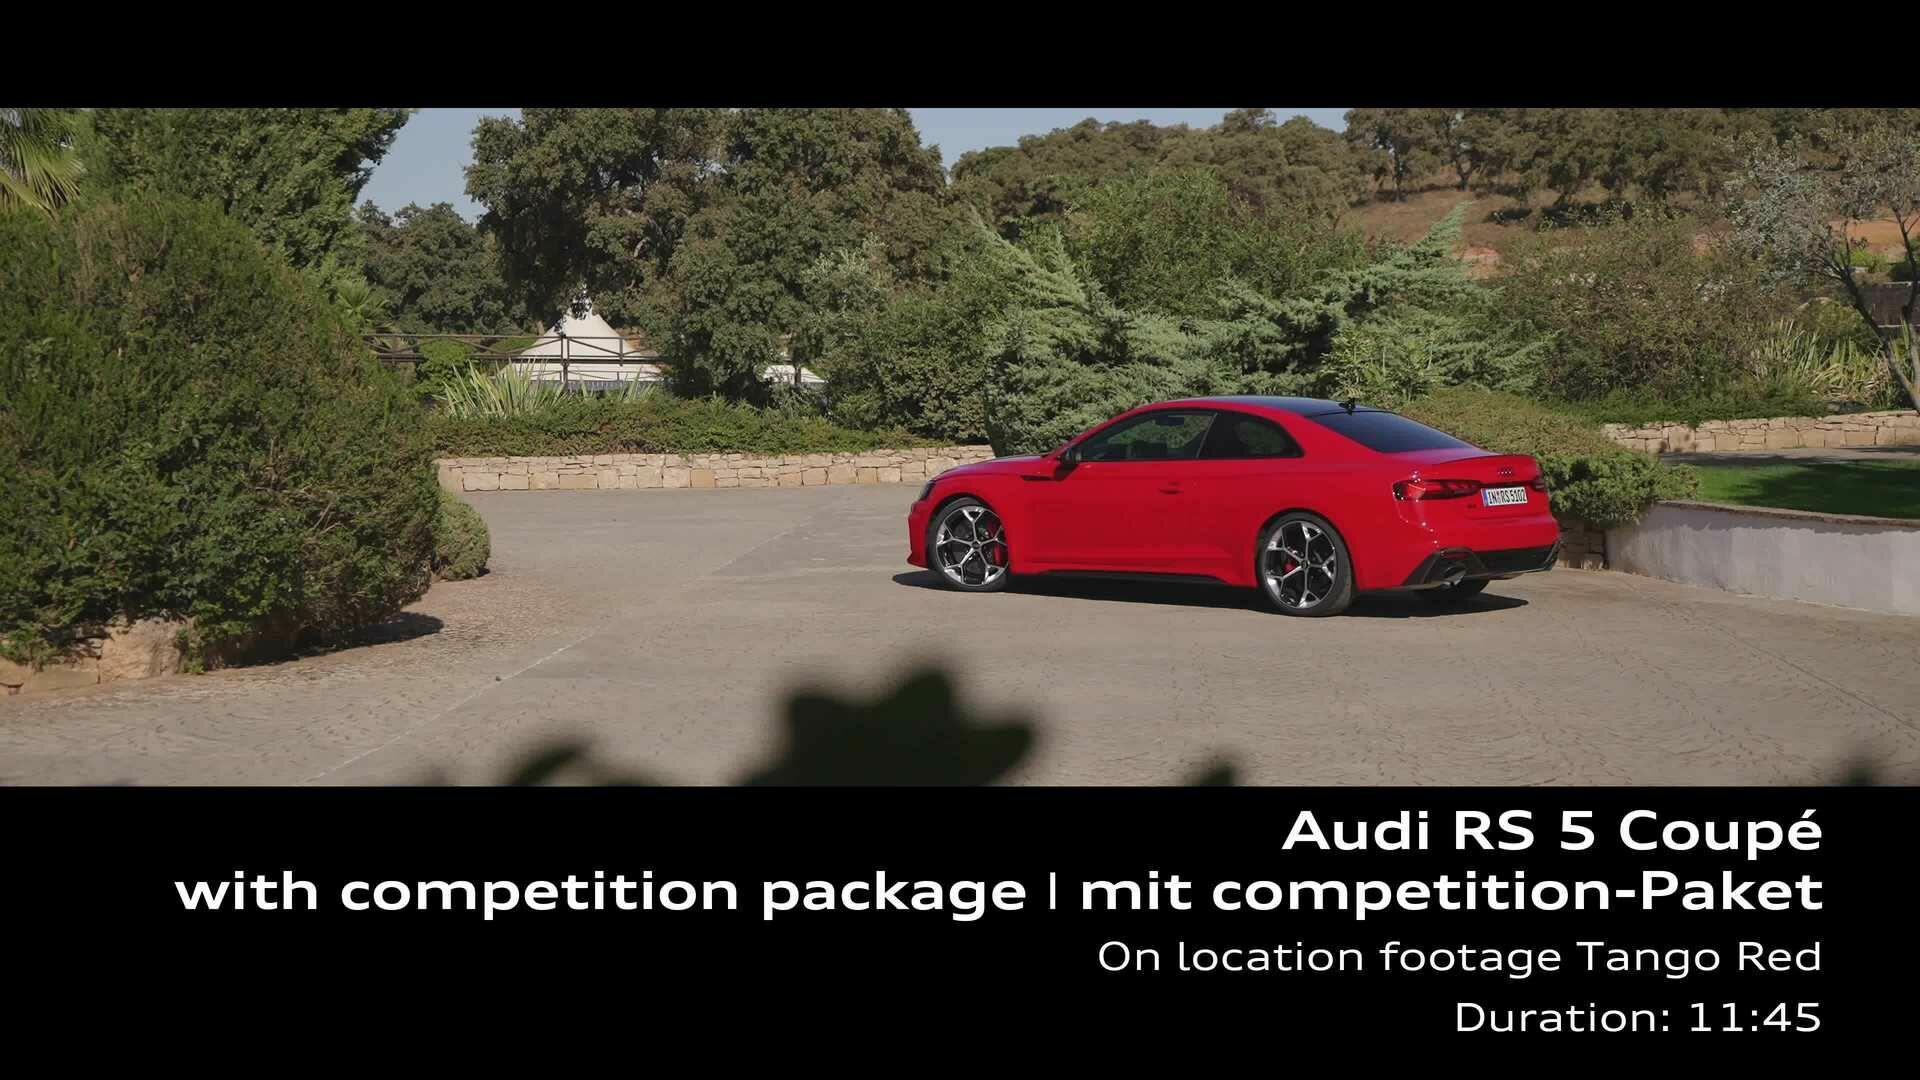 Footage: Audi RS 5 Coupé with competition plus package